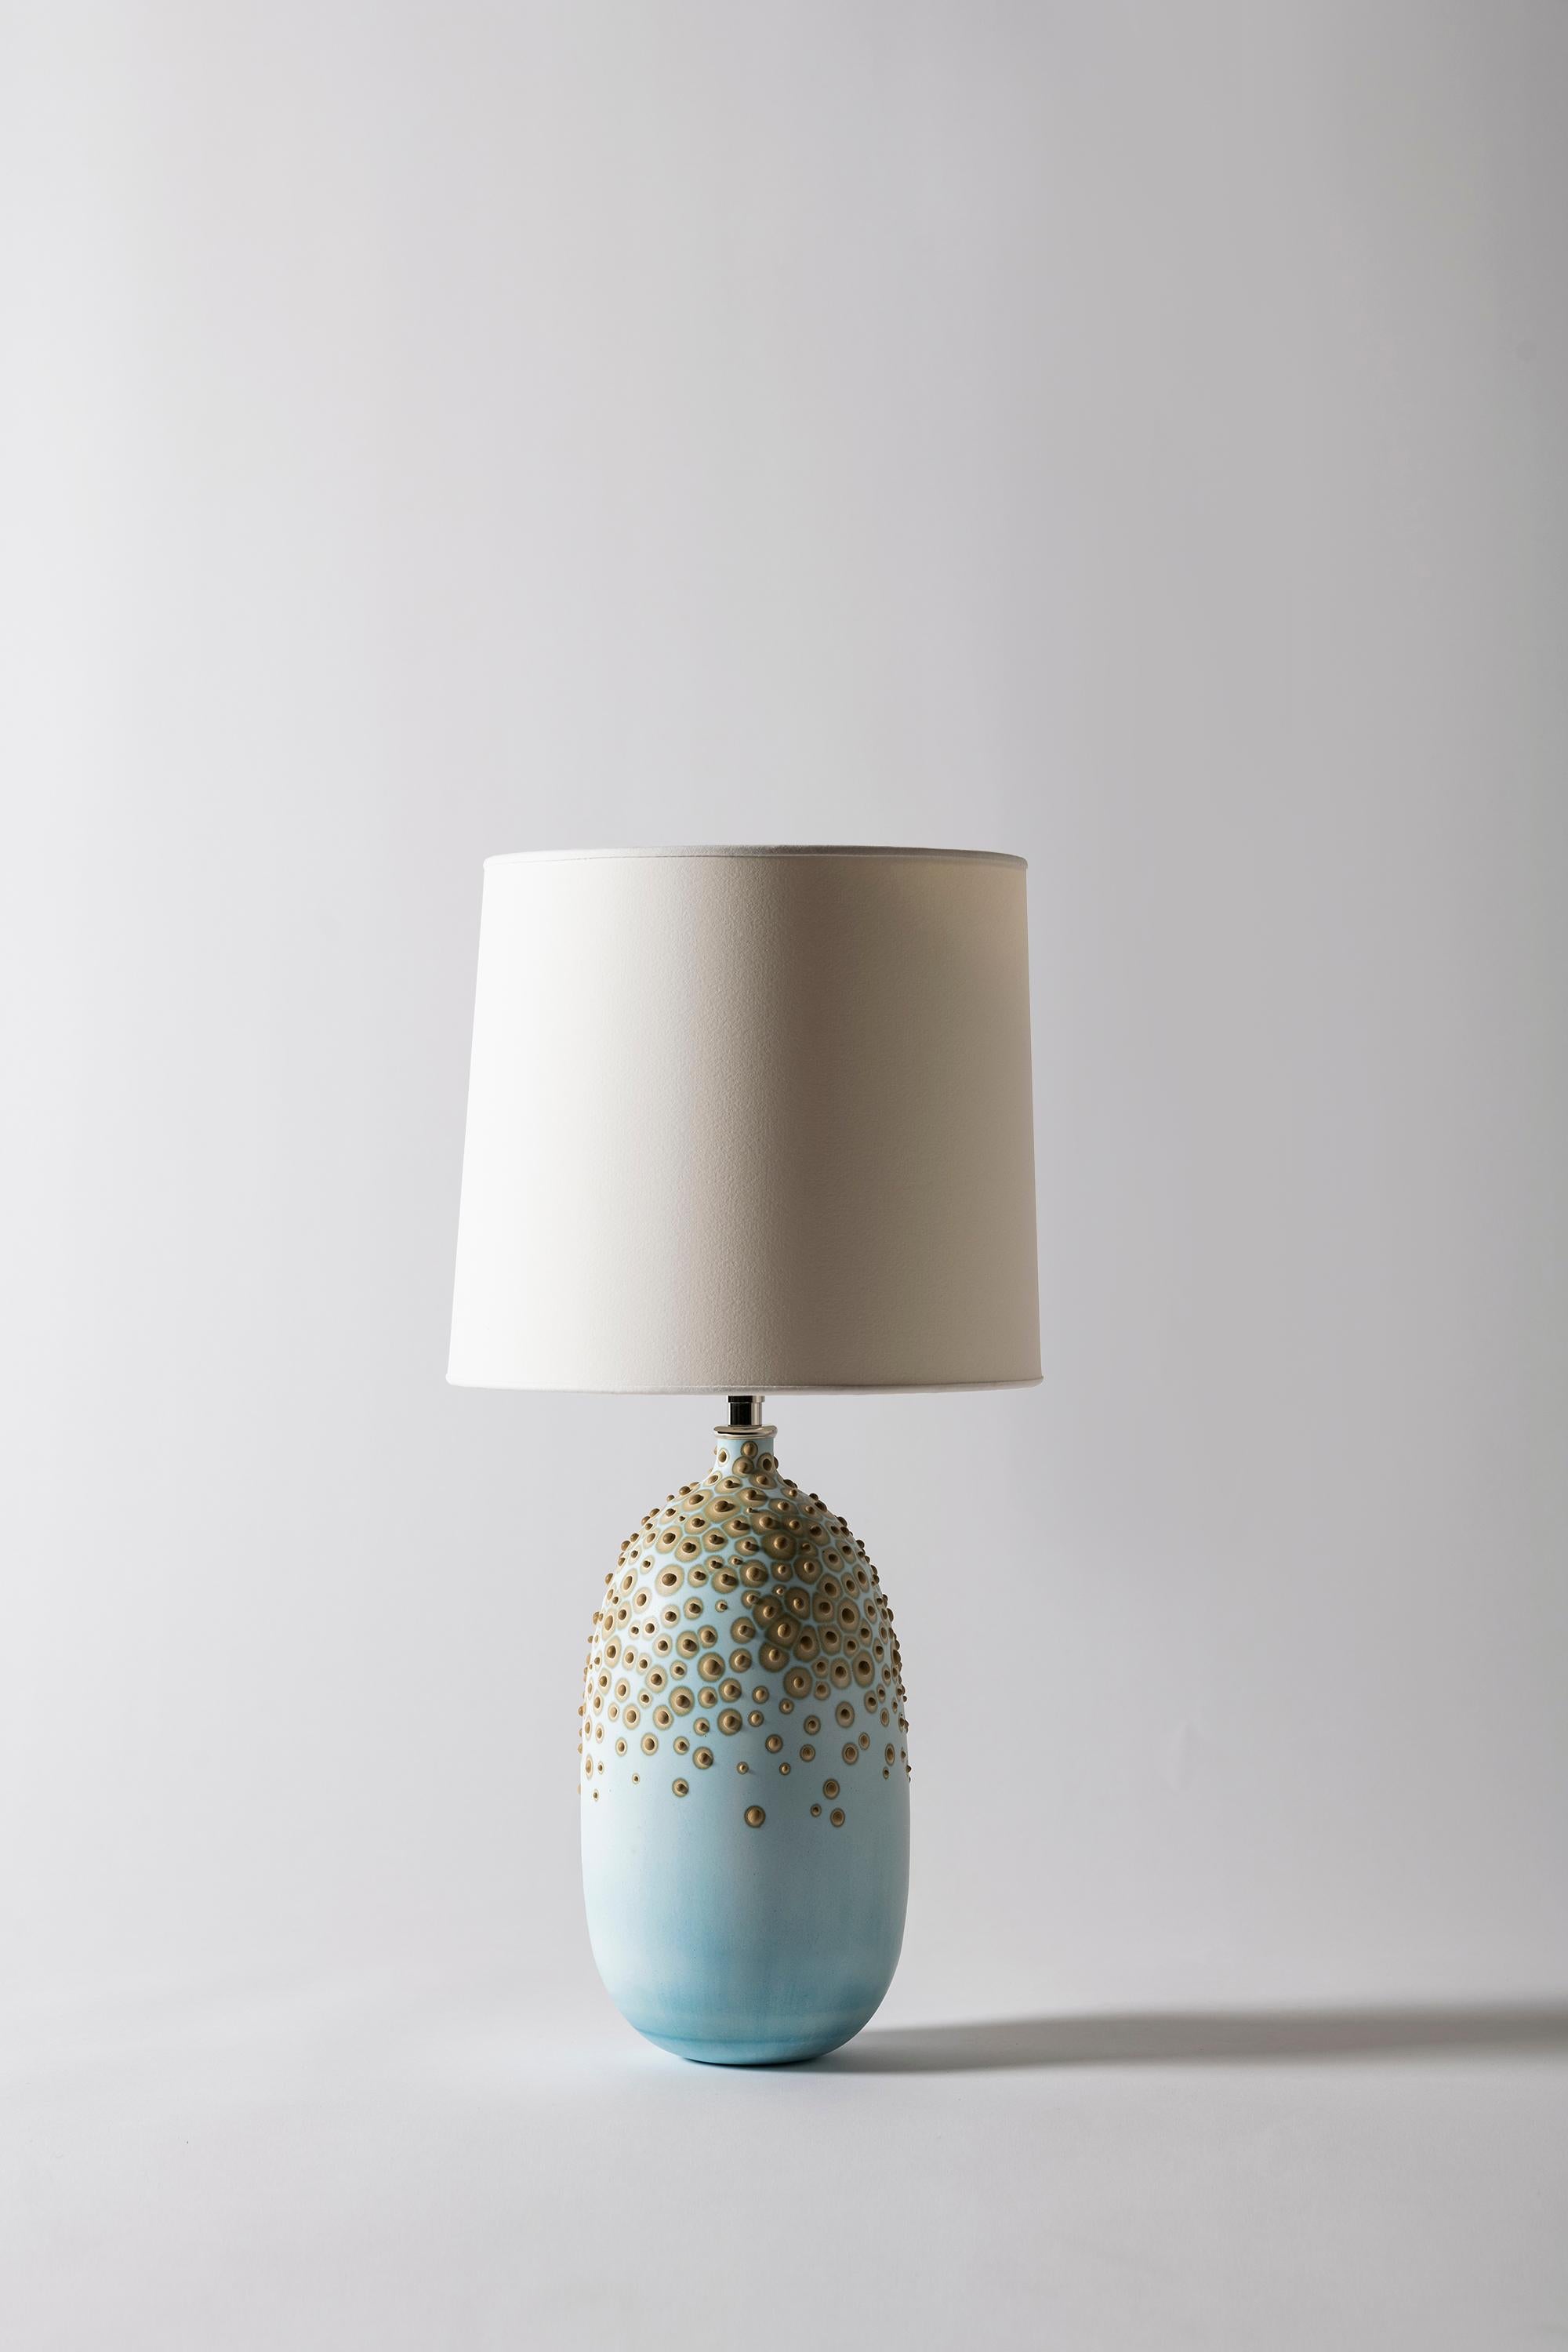 Huxley lamp in Glacier by Elyse Graham
Dimensions: D26 x H51 cm
Materials: Plaster, Resin, Cotton rag Paper, brass, Nickel.Hardware: polished nickel-plated brass UNO threaded socket
with turn key switch, in-line dimmer.
Molded, dyed, and